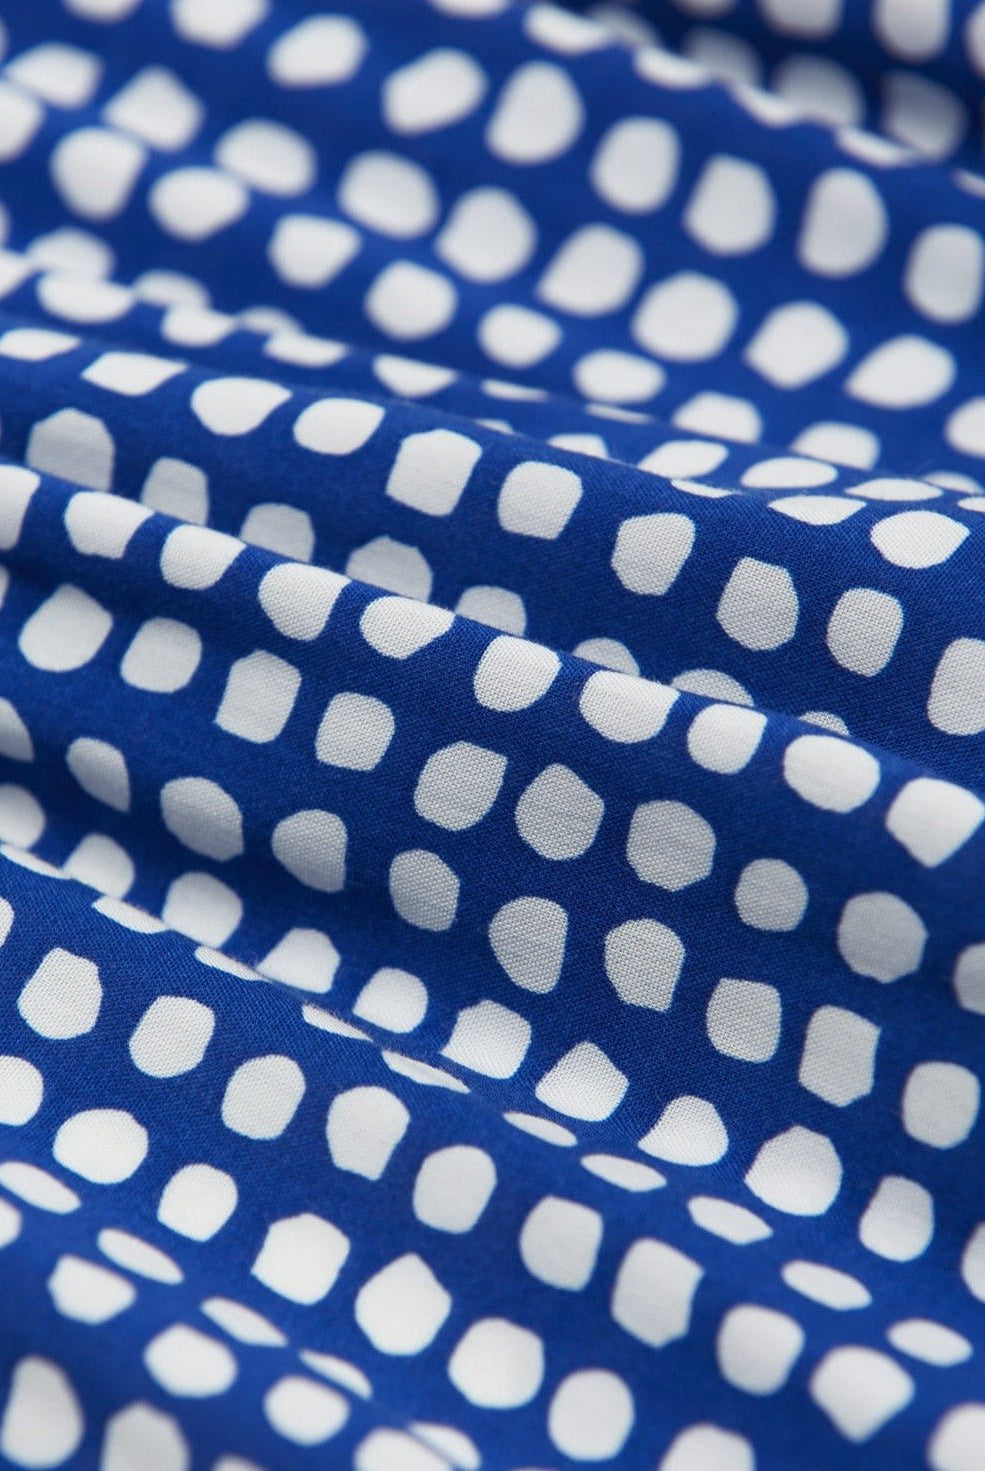 Arsène et Les Pipelettes -Baby Polka dot Print blue overall fabric